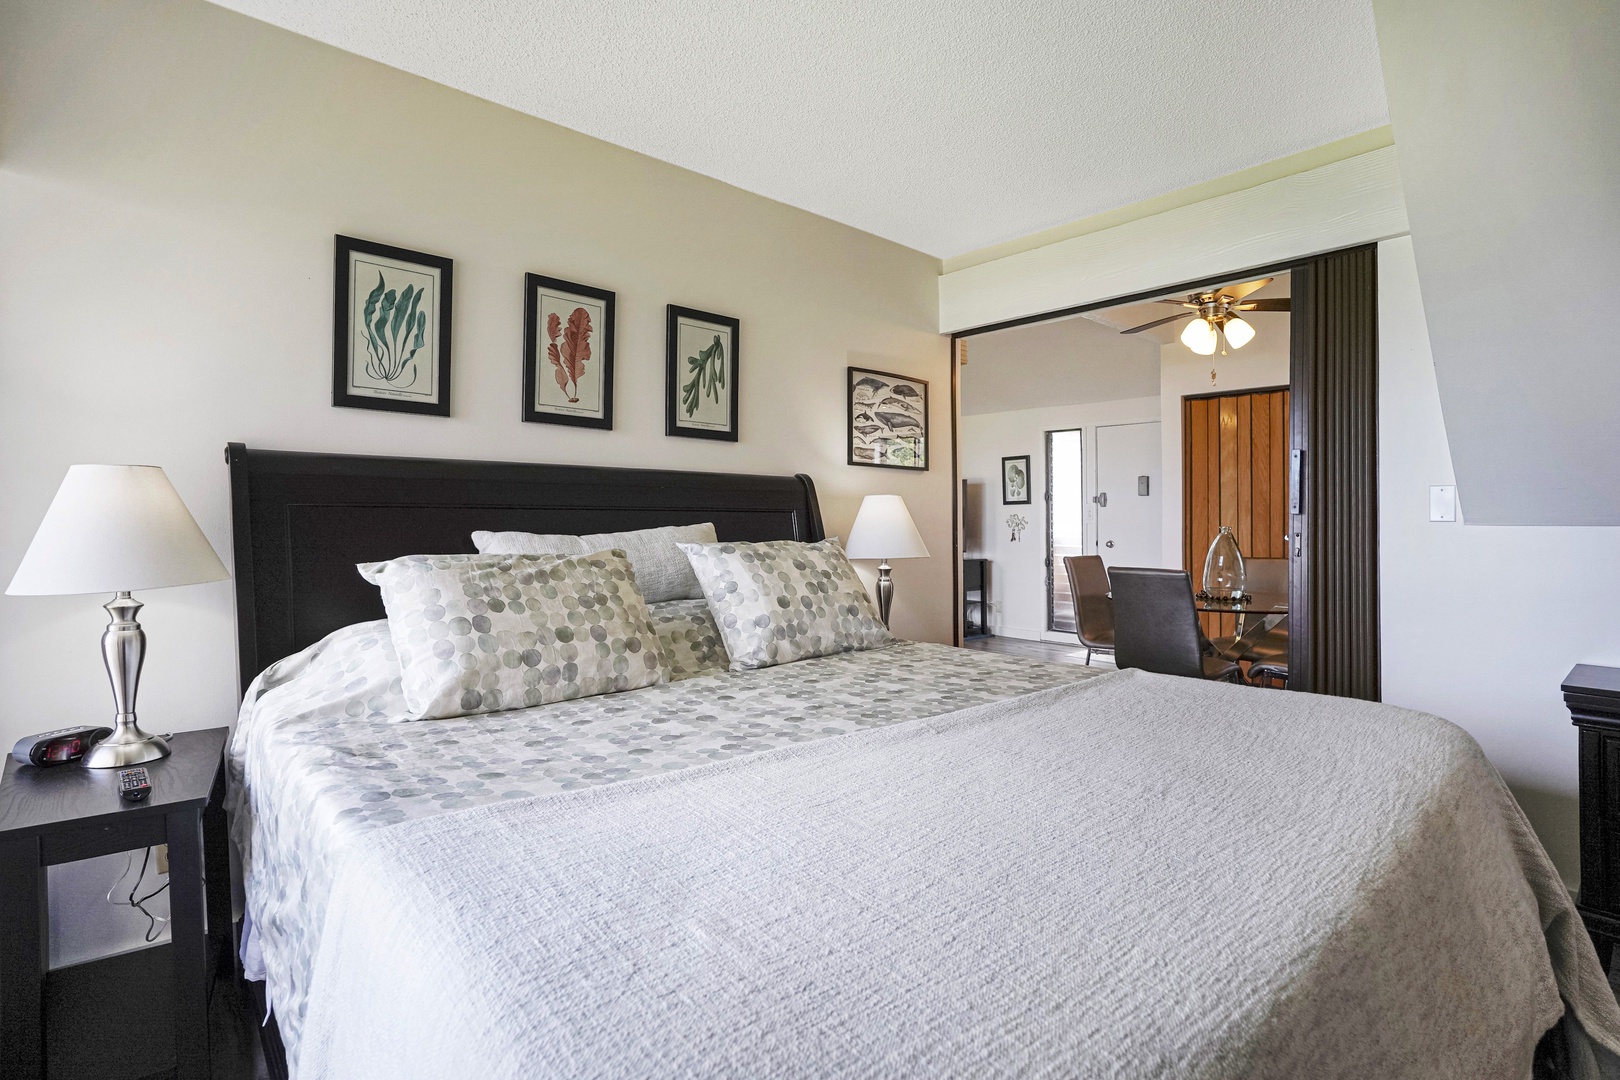 Princeville Vacation Rentals, Sealodge Villa H5 - King-size bed in the primary bedroom